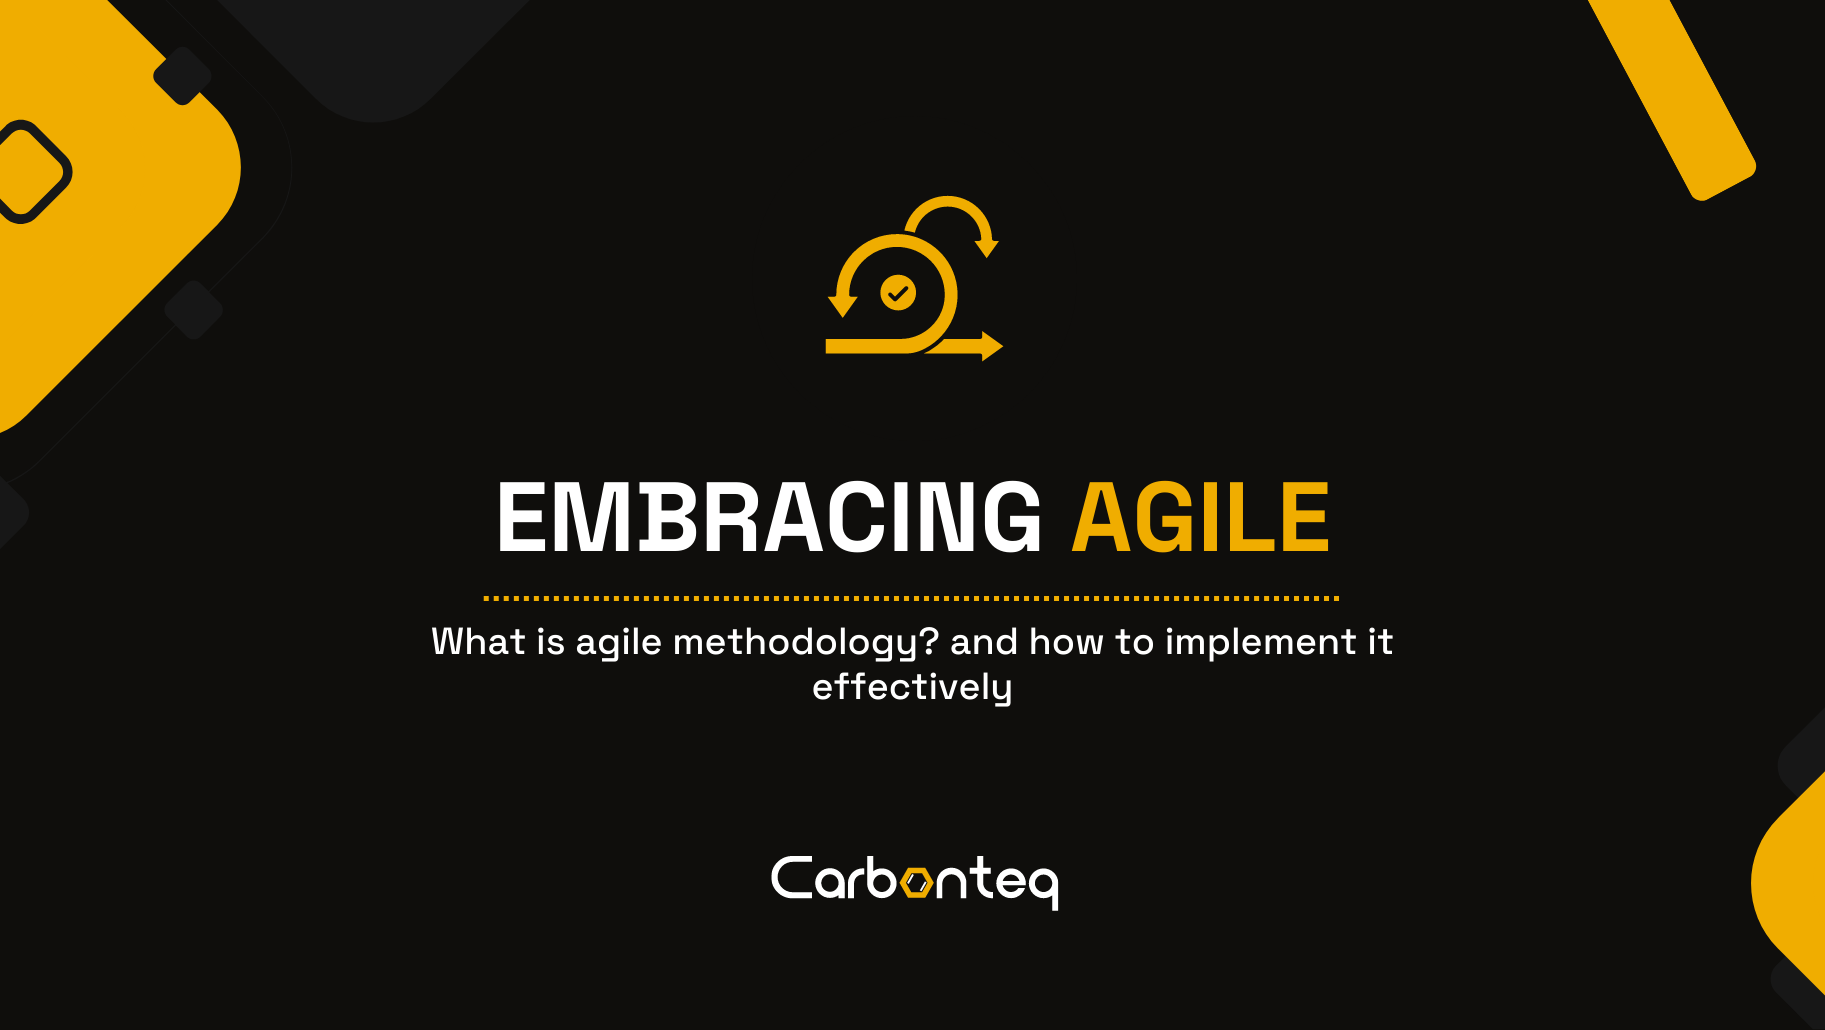 Embracing Agile: What is Agile Methodology and How to implement it effectively